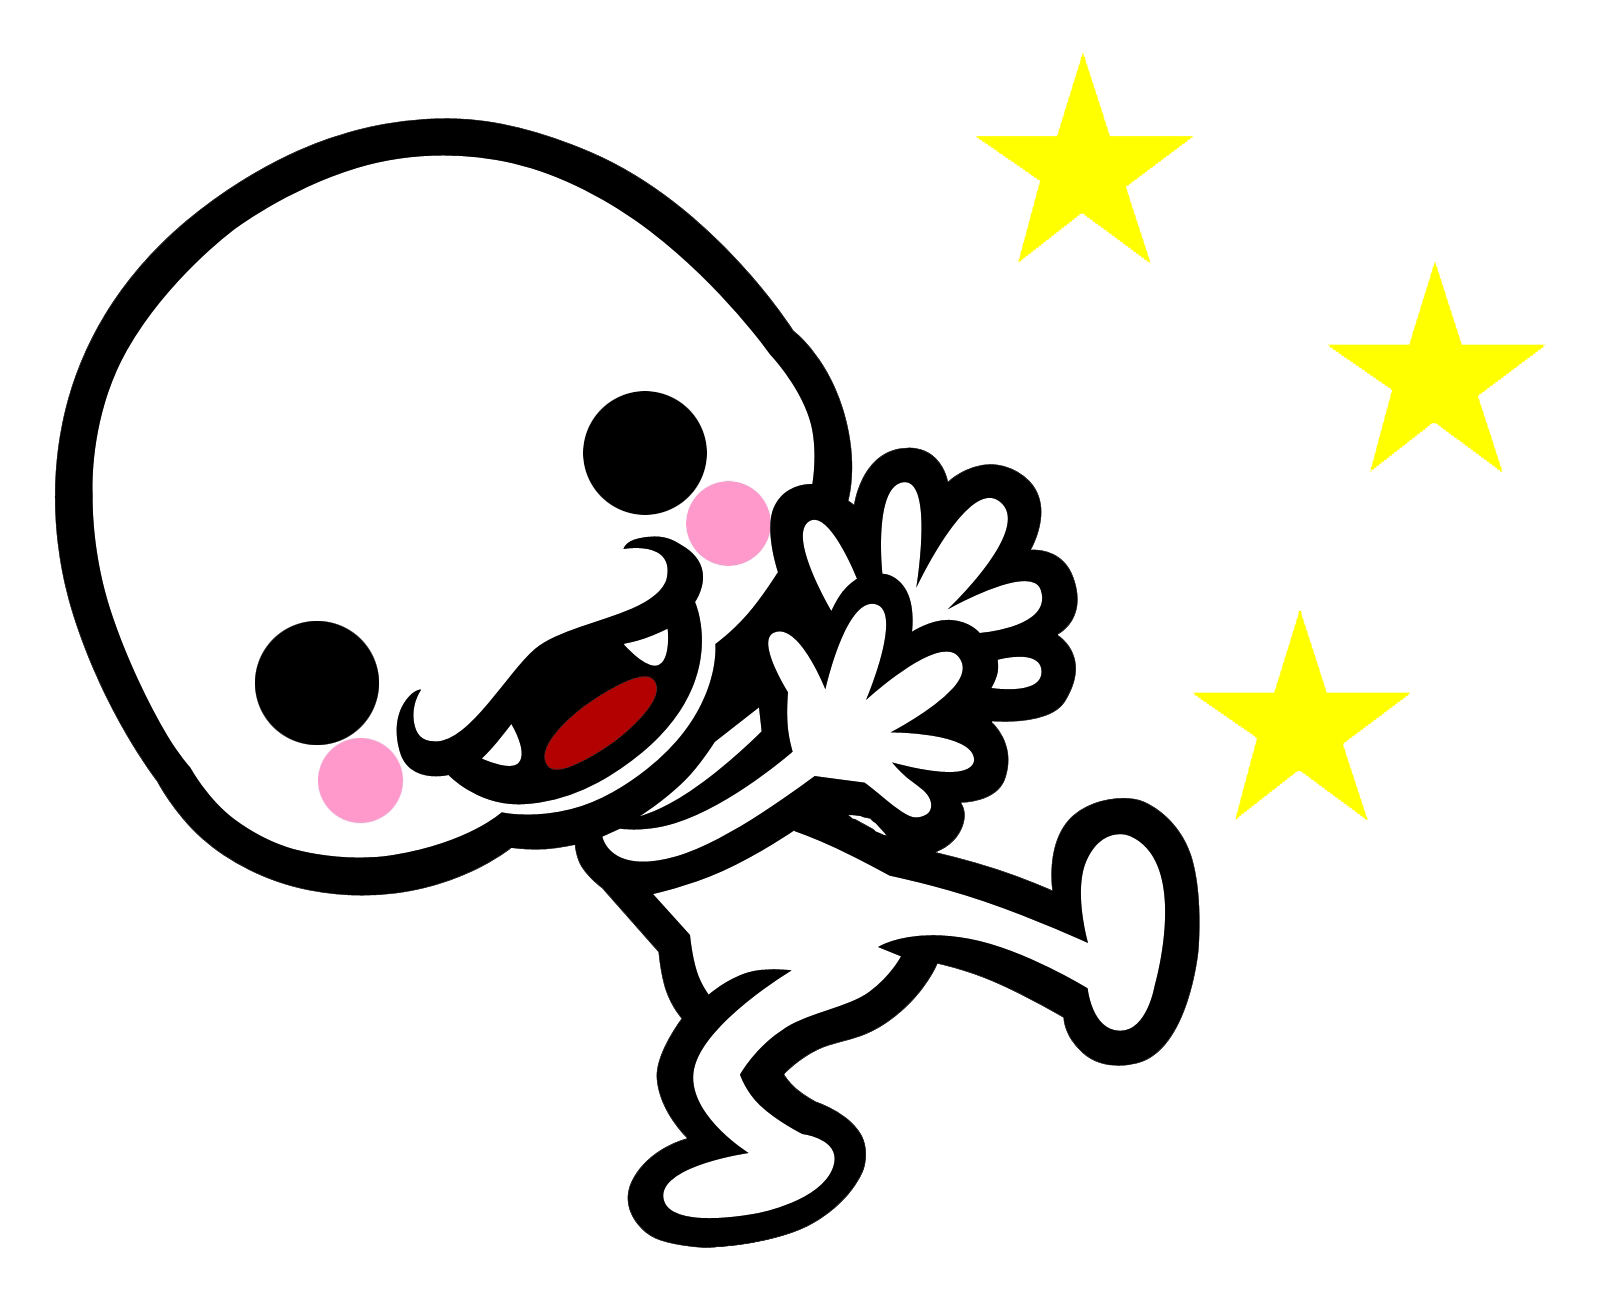 Name: Marshal Origin: Rhythm Heaven Fever Marshal first appeared in the gam...